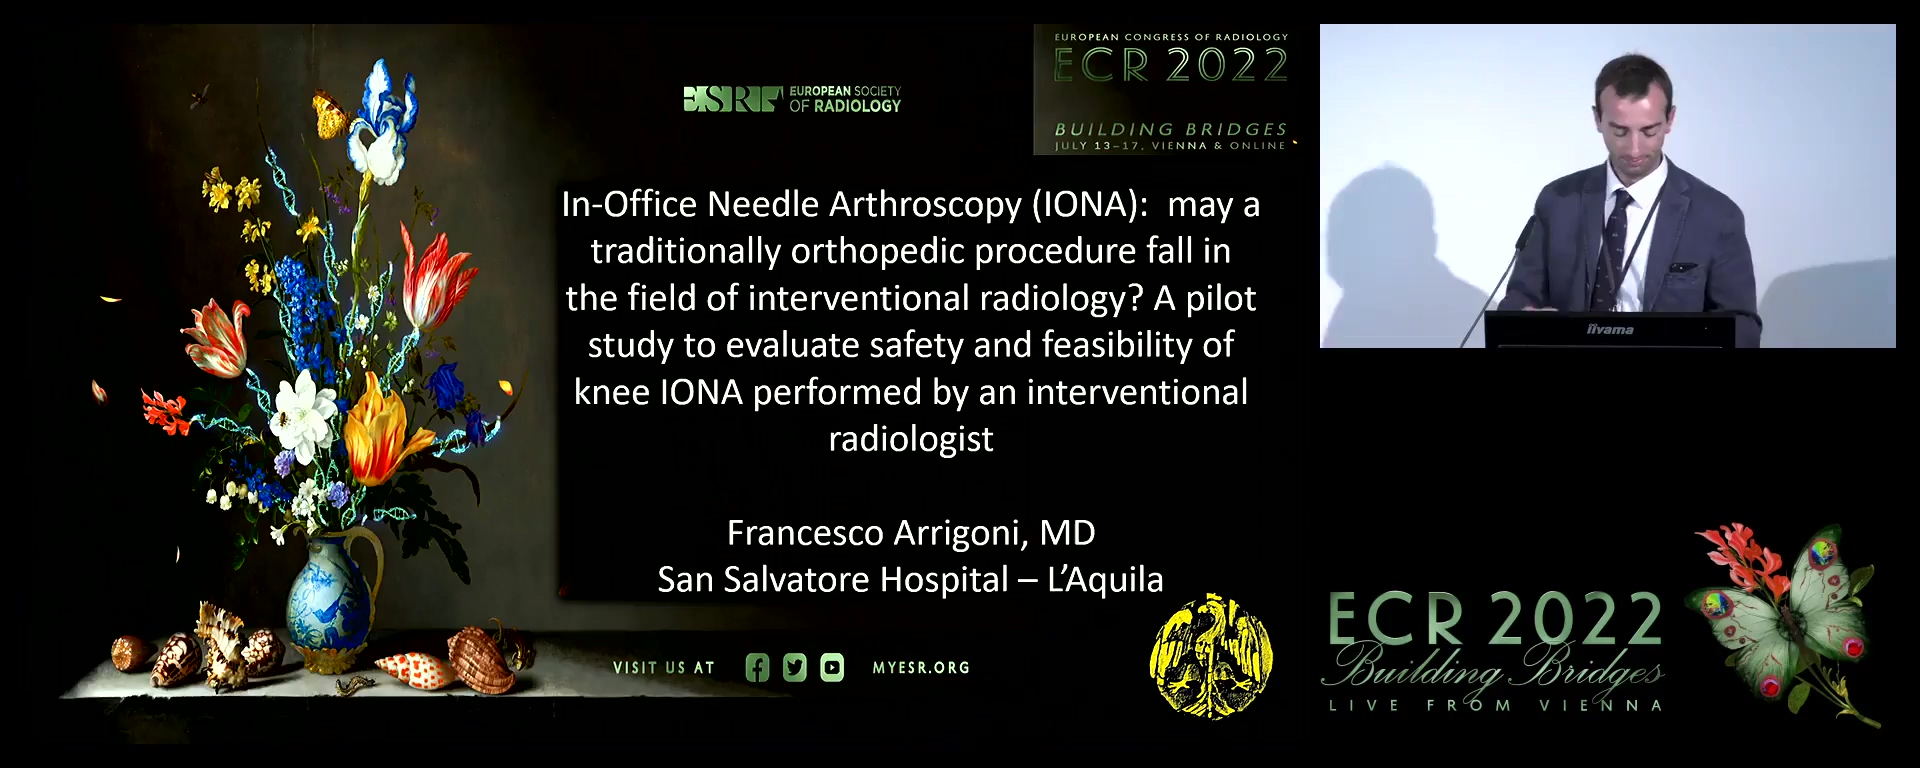 In-office needle arthroscopy (IONA): may a traditionally orthopedic procedure fall in the field of interventional radiology? A pilot study to evaluate knee IONA performed by interventional radiologist - Francesco Arrigoni, L'Aquila / IT